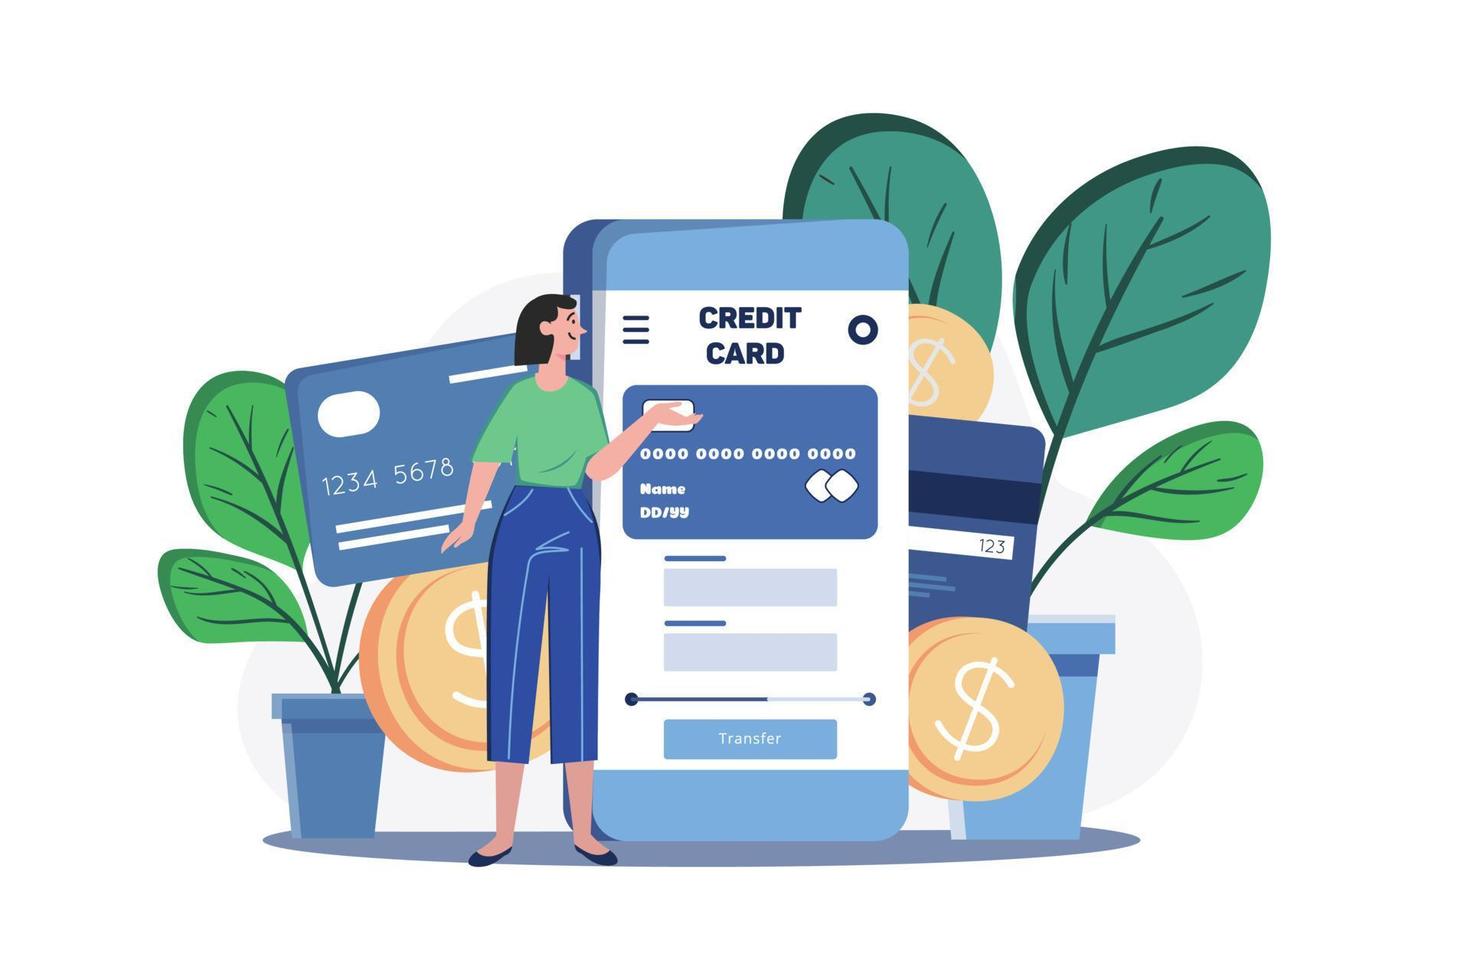 Credit Card Application Illustration concept on white background vector